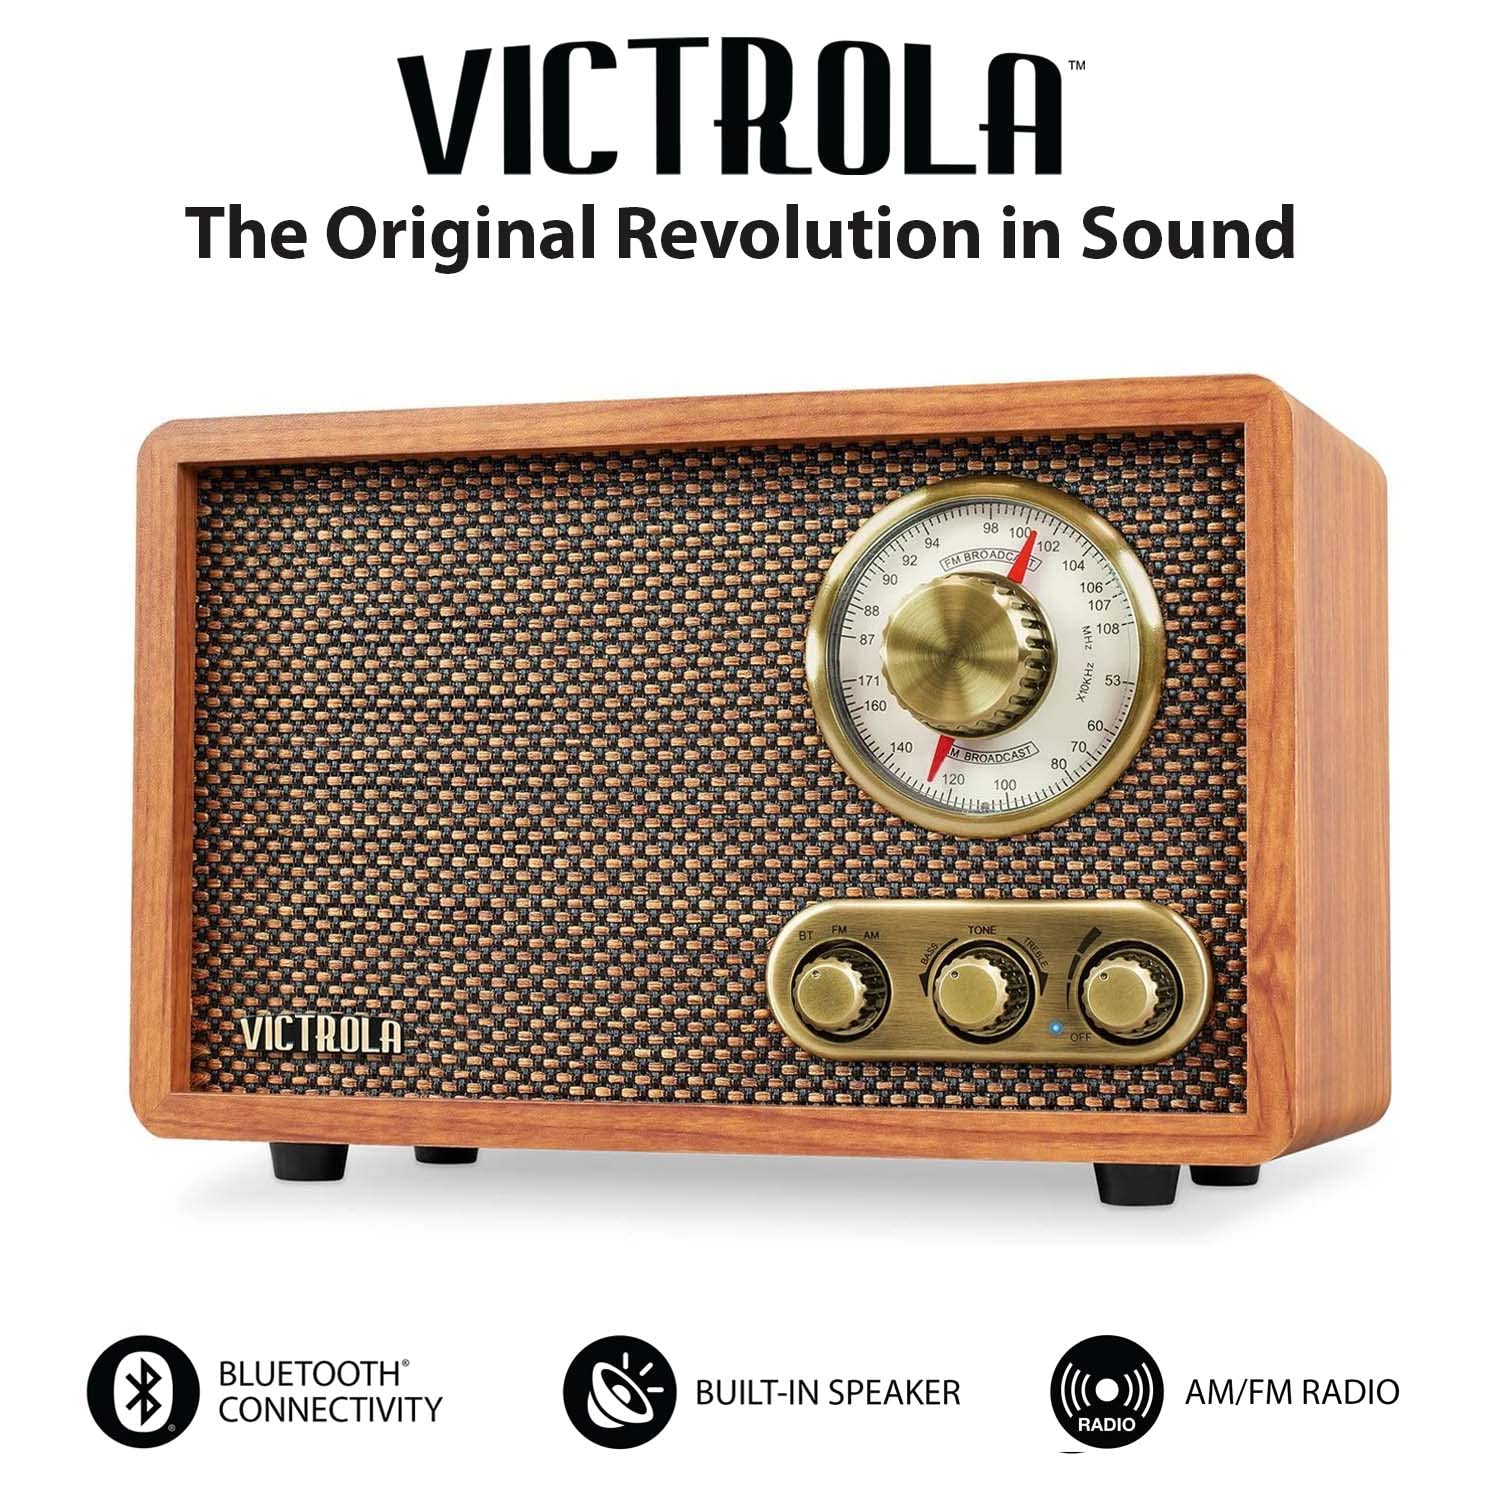 Victrola Retro Wood Bluetooth Radio with Built-in Speakers, Elegant & Vintage Design, Rotary AM/FM Tuning Dial, Wireless Streaming, Walnut